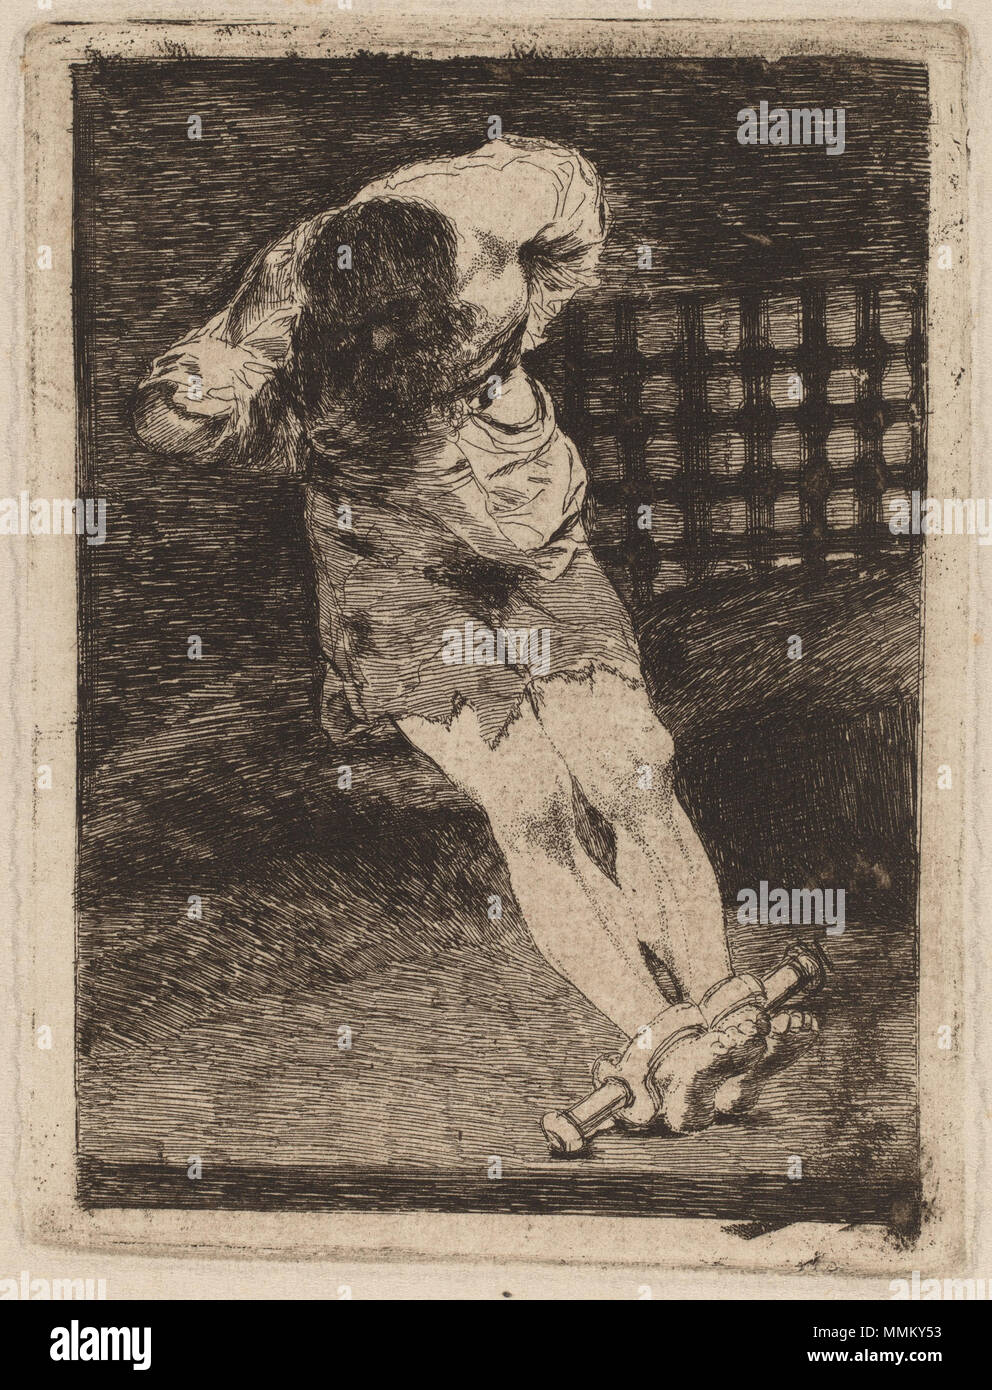 Francisco de Goya, La seguridad de un reo no exige tormento  (The Custody of a Criminal Does Not Call for Torture, Spanish, 1746 - 1828, c. 1810, etching and burin [trial proof printed posthumously before 1859], Rosenwald Collection Goya - La seguridad de un reo no exige tormento (The Custody of a Criminal Does Not Call for Torture) Stock Photo